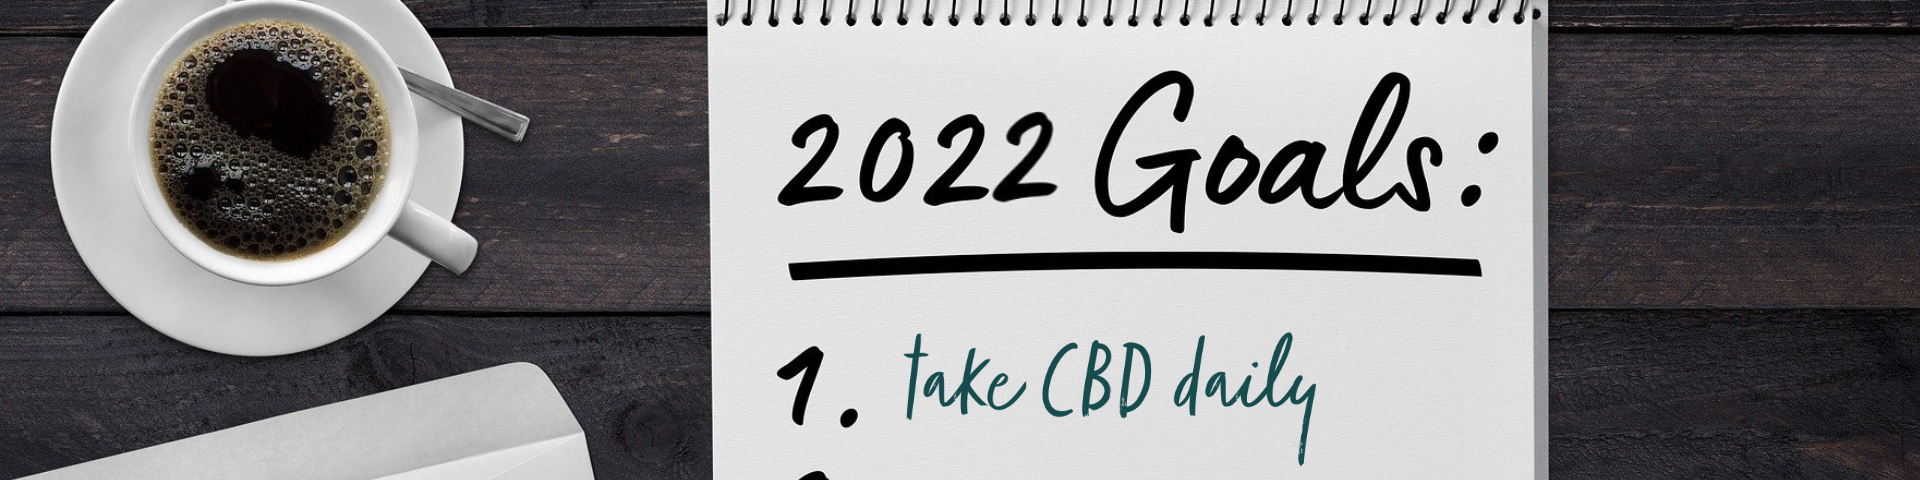 4 Ways CBD Can Help With Your New Year’s Resolutions